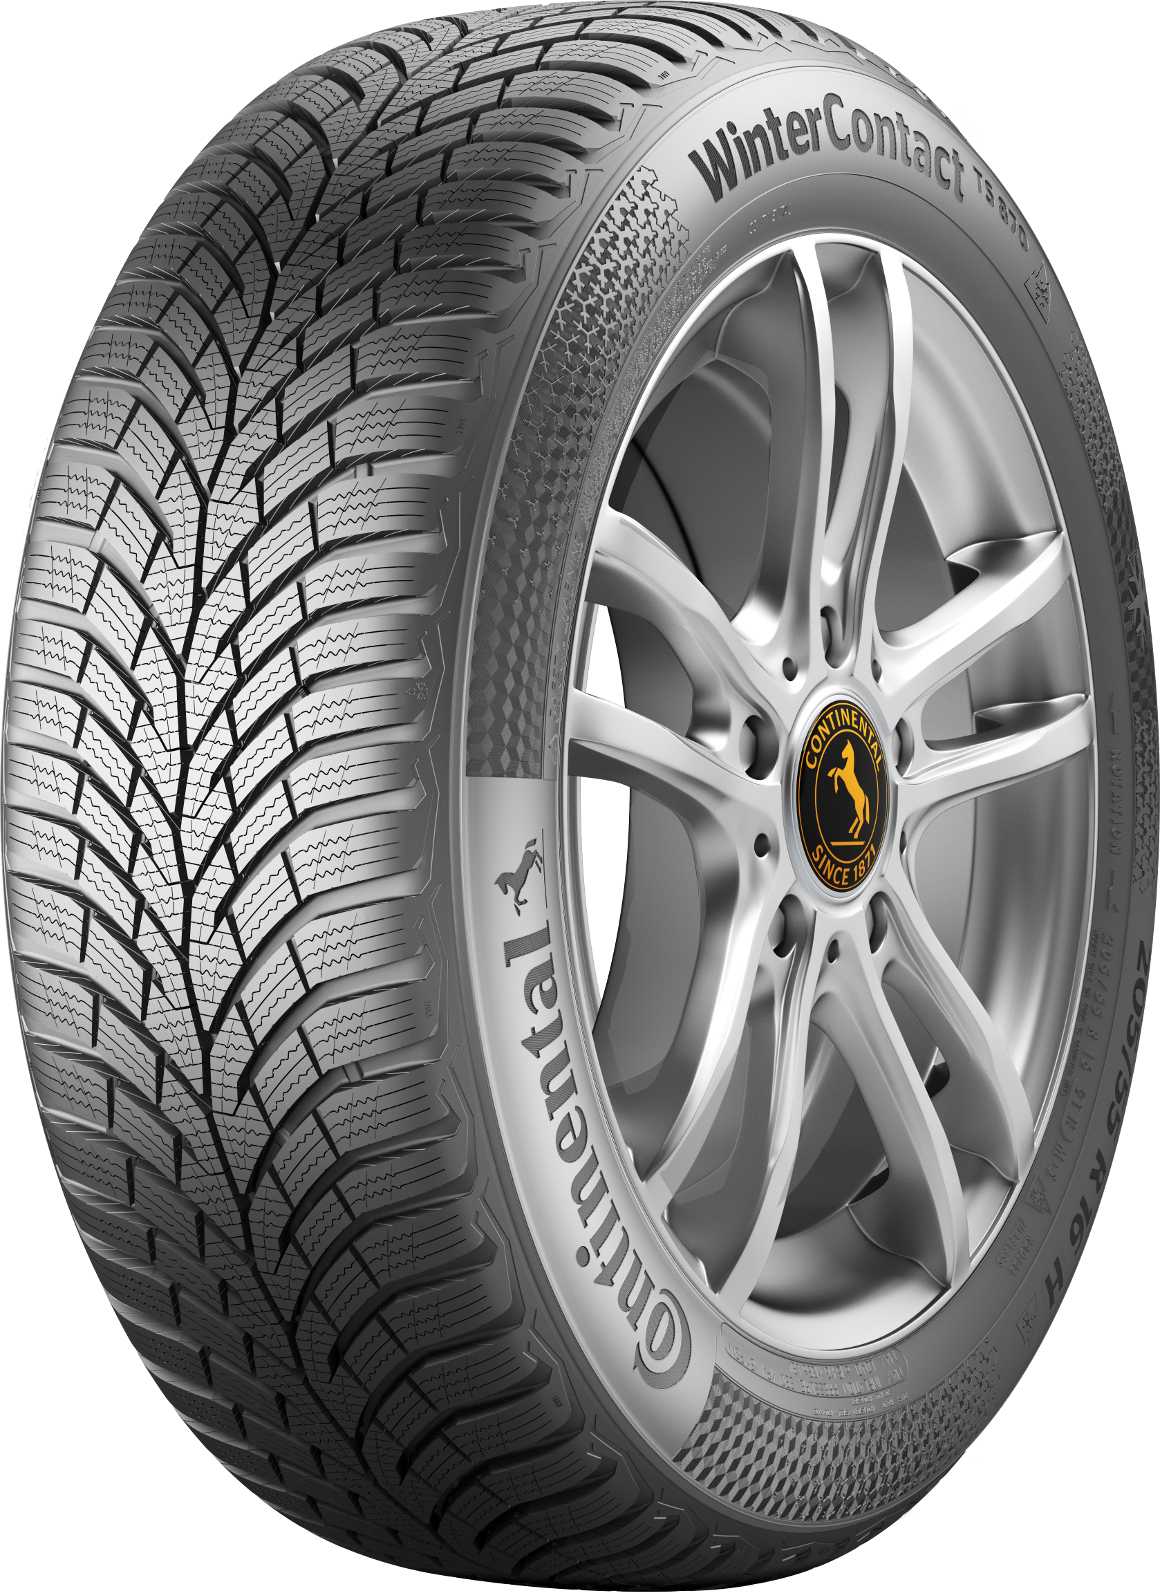    Continental Winter Contact TS870 195/65 R15 